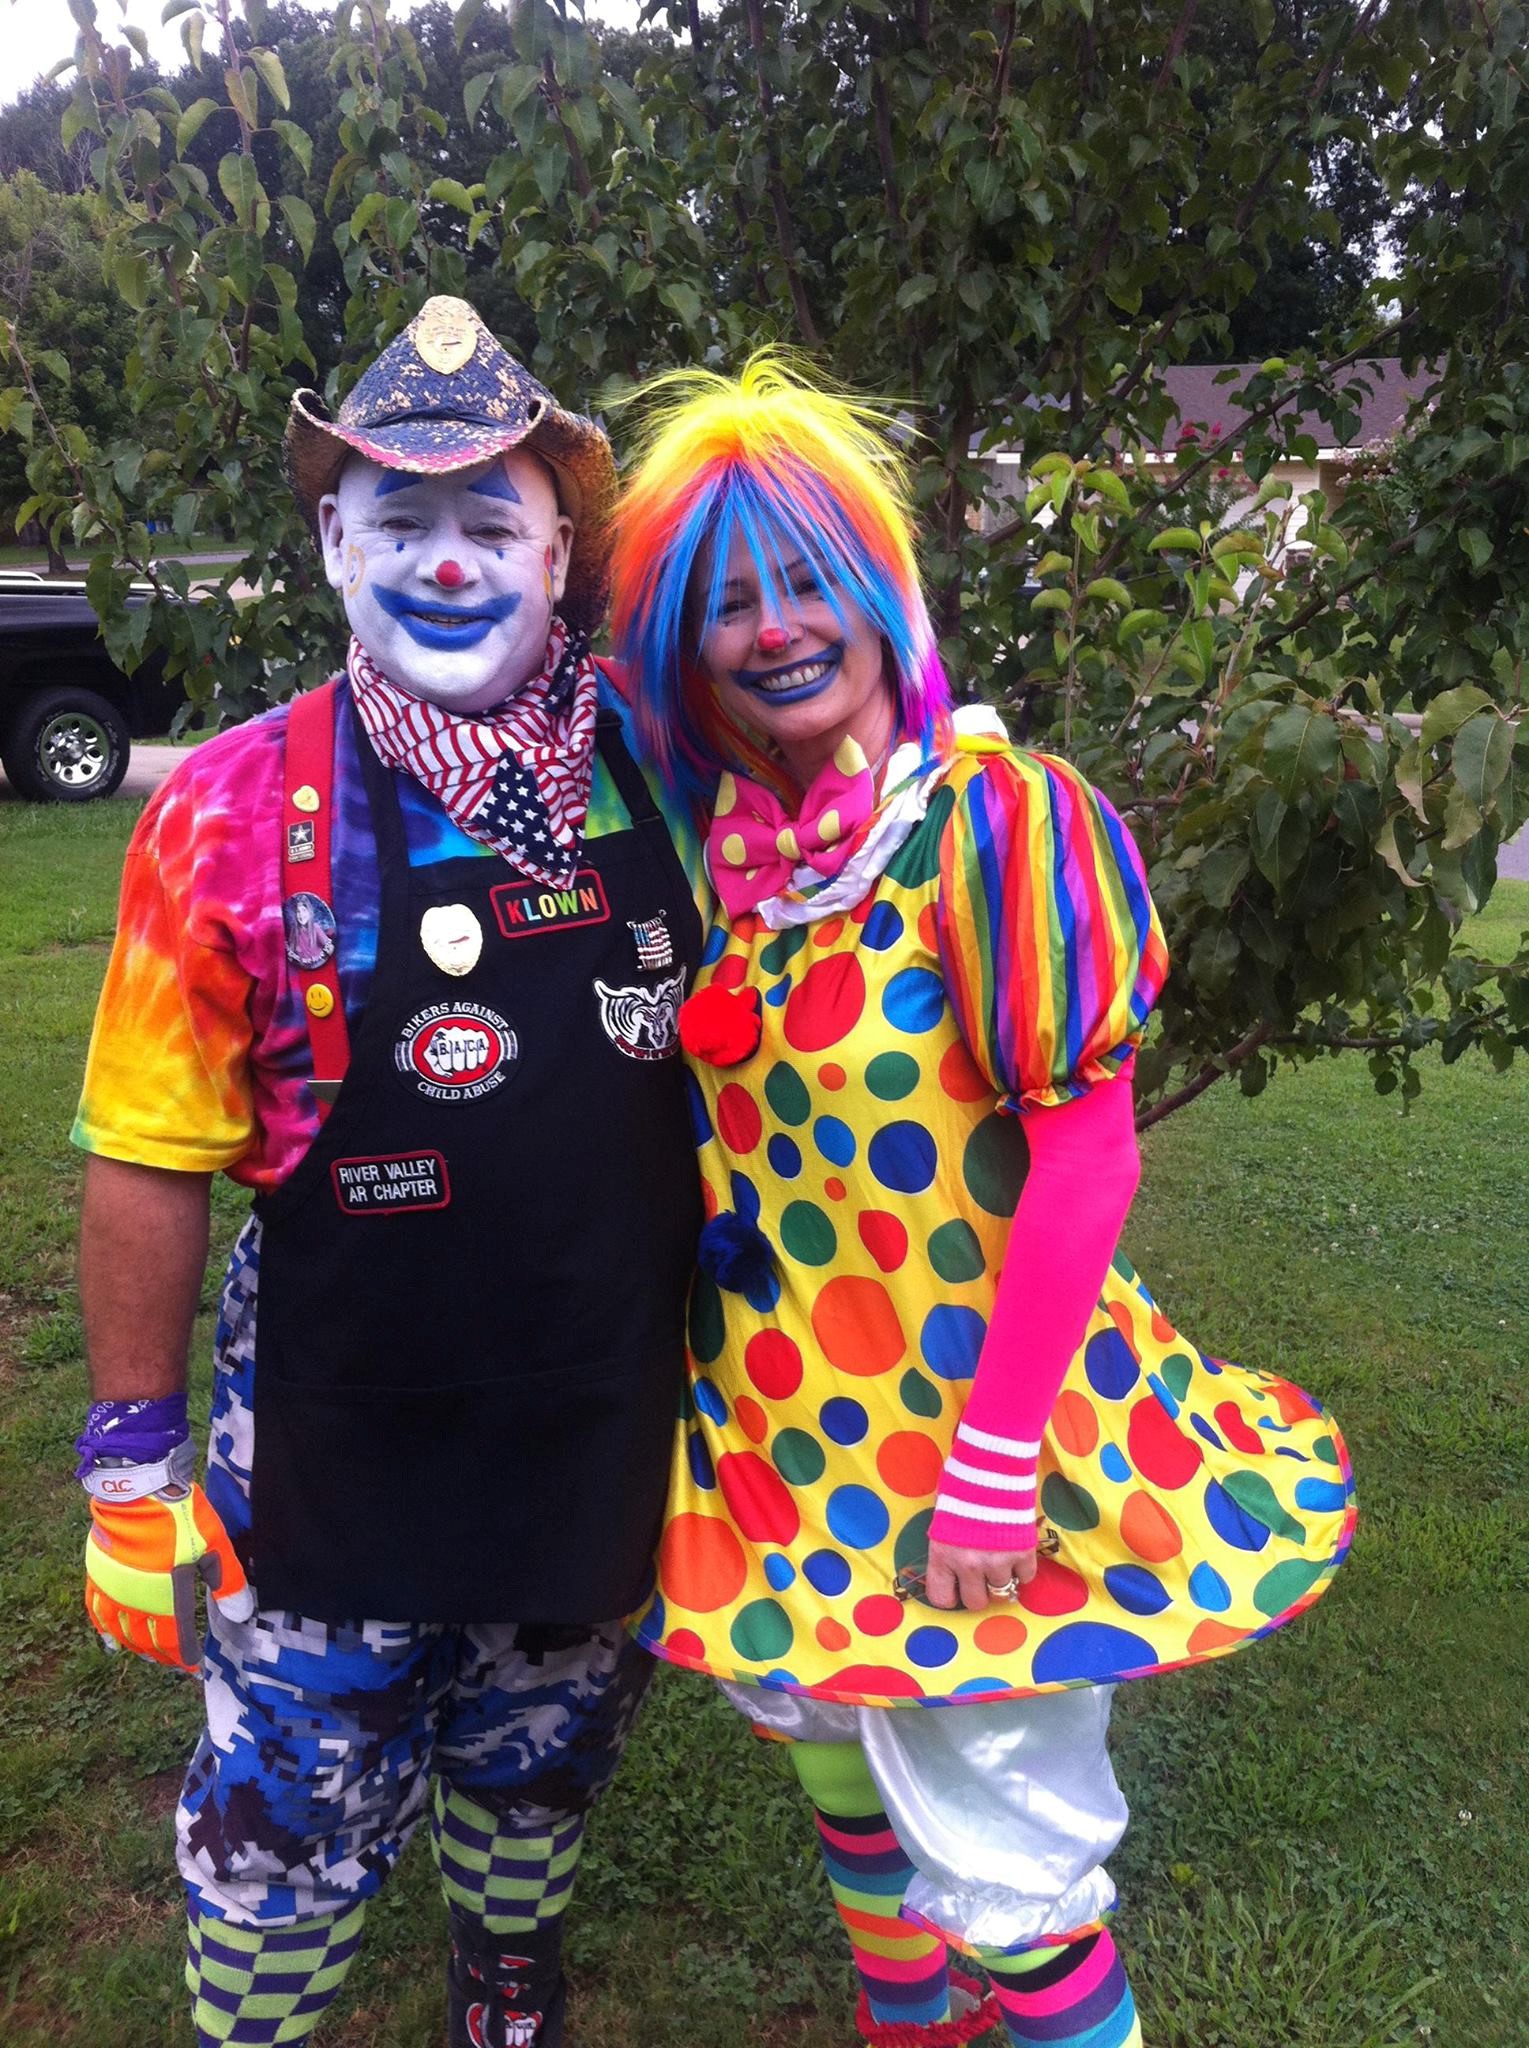 Paulie The Klown and His Lady Clown